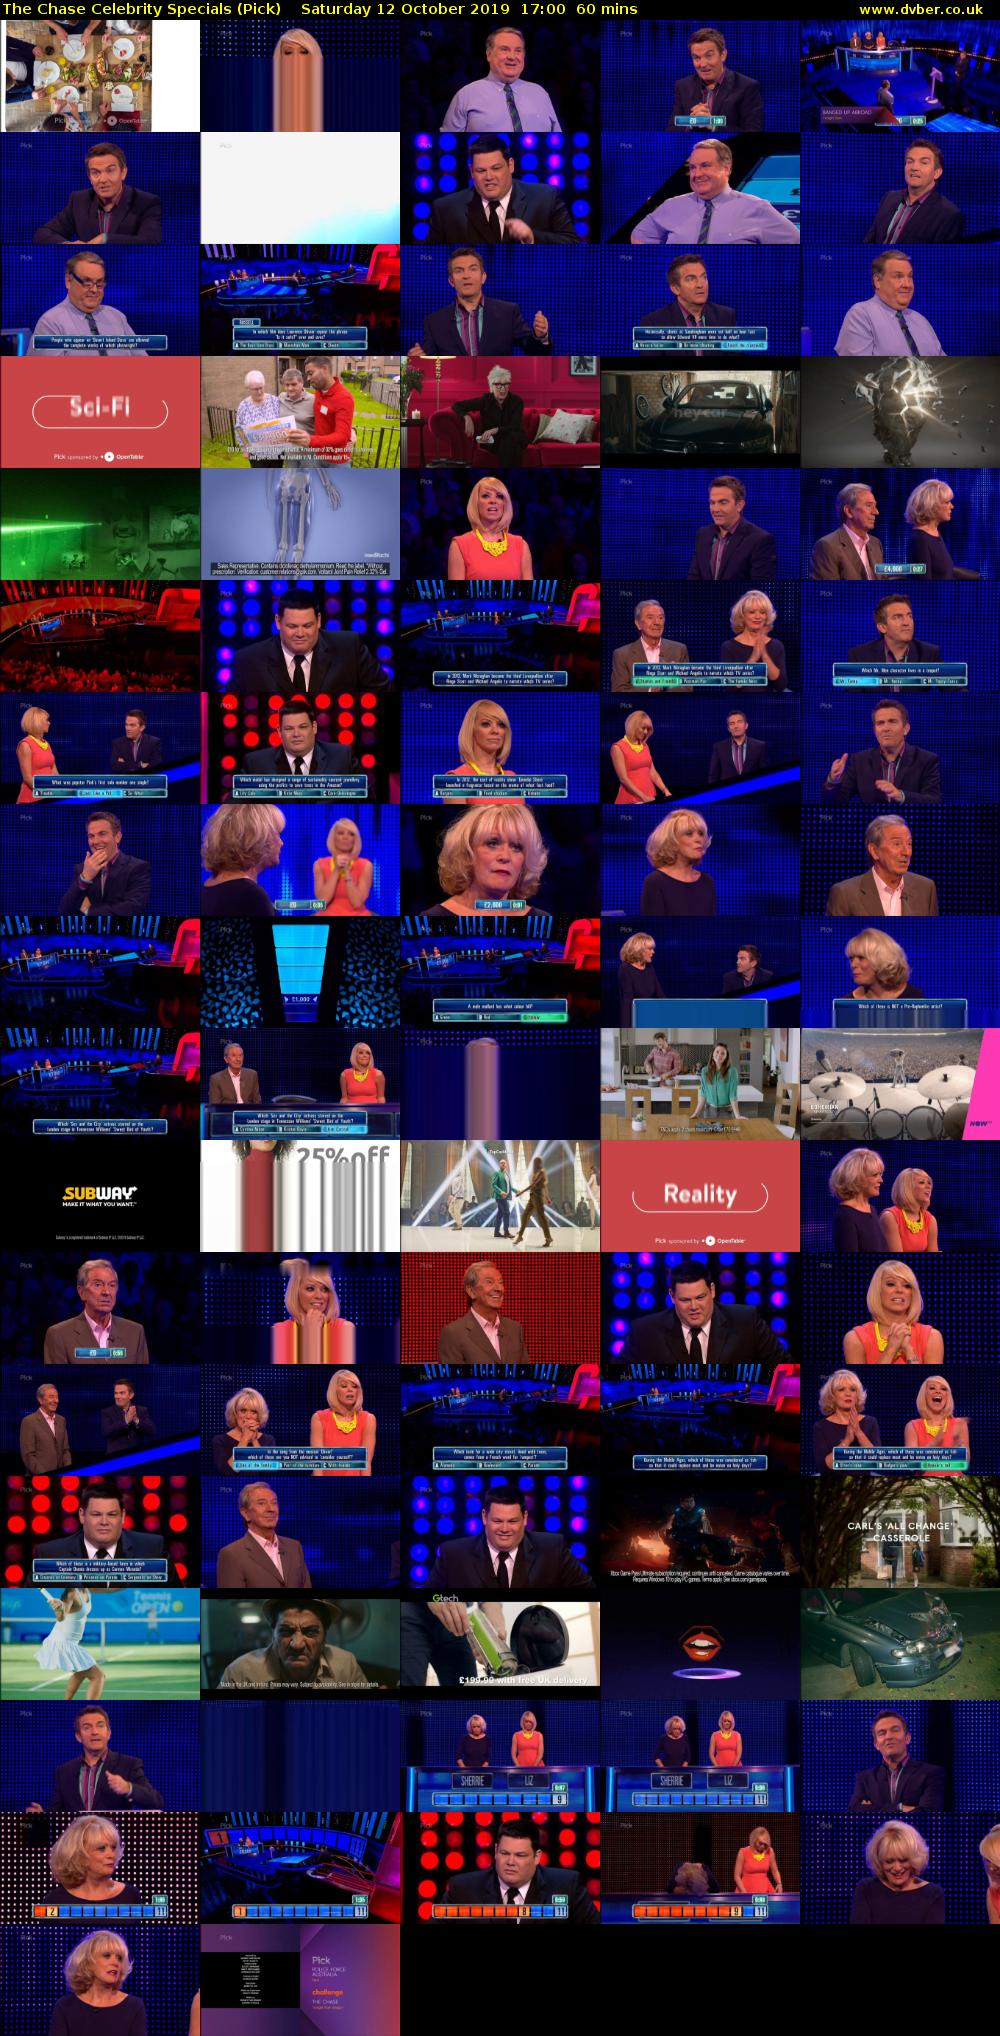 The Chase Celebrity Specials (Pick) Saturday 12 October 2019 17:00 - 18:00